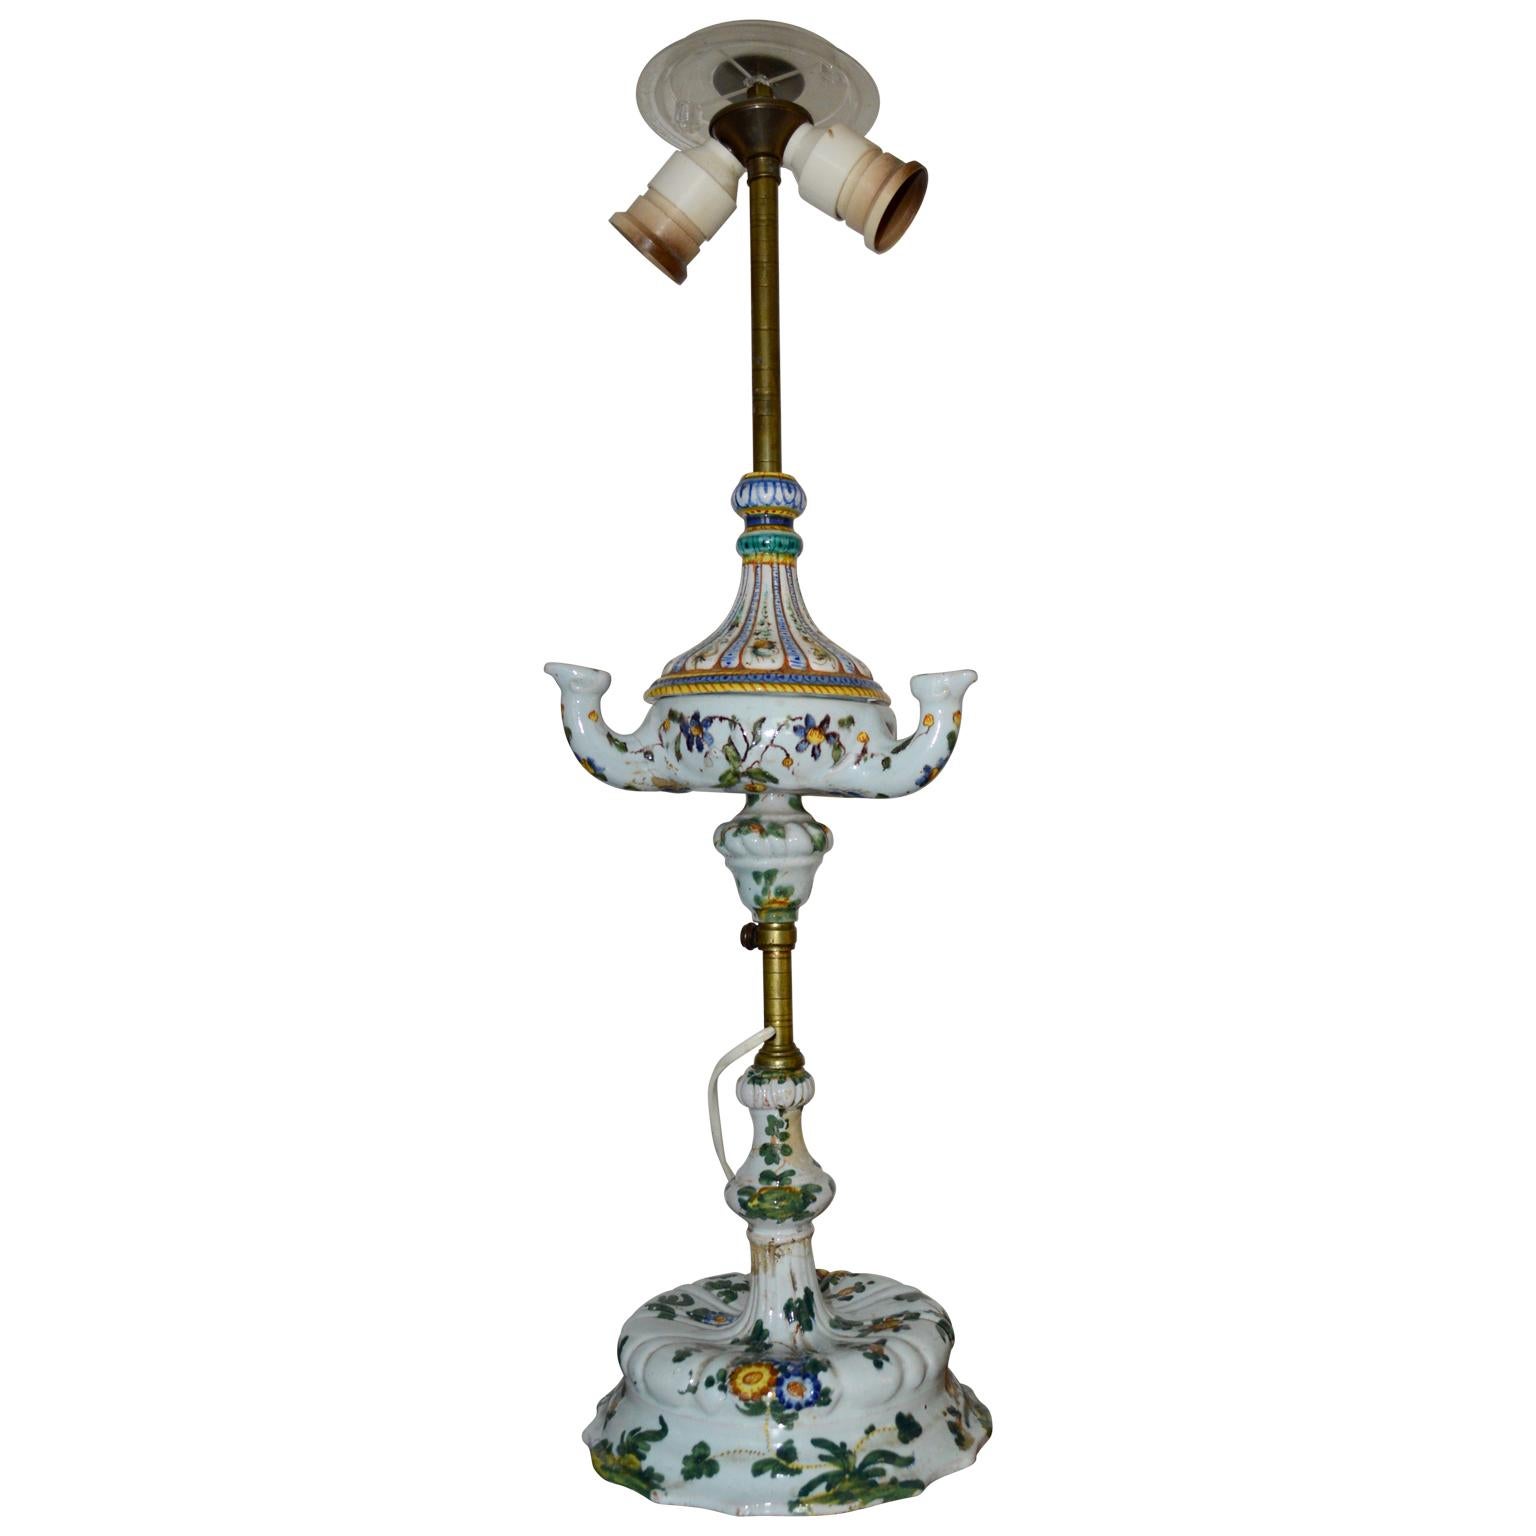 Rococo Early 19th Century Faience Table Lamp, Converted From Oil-Burning Lamp For Sale